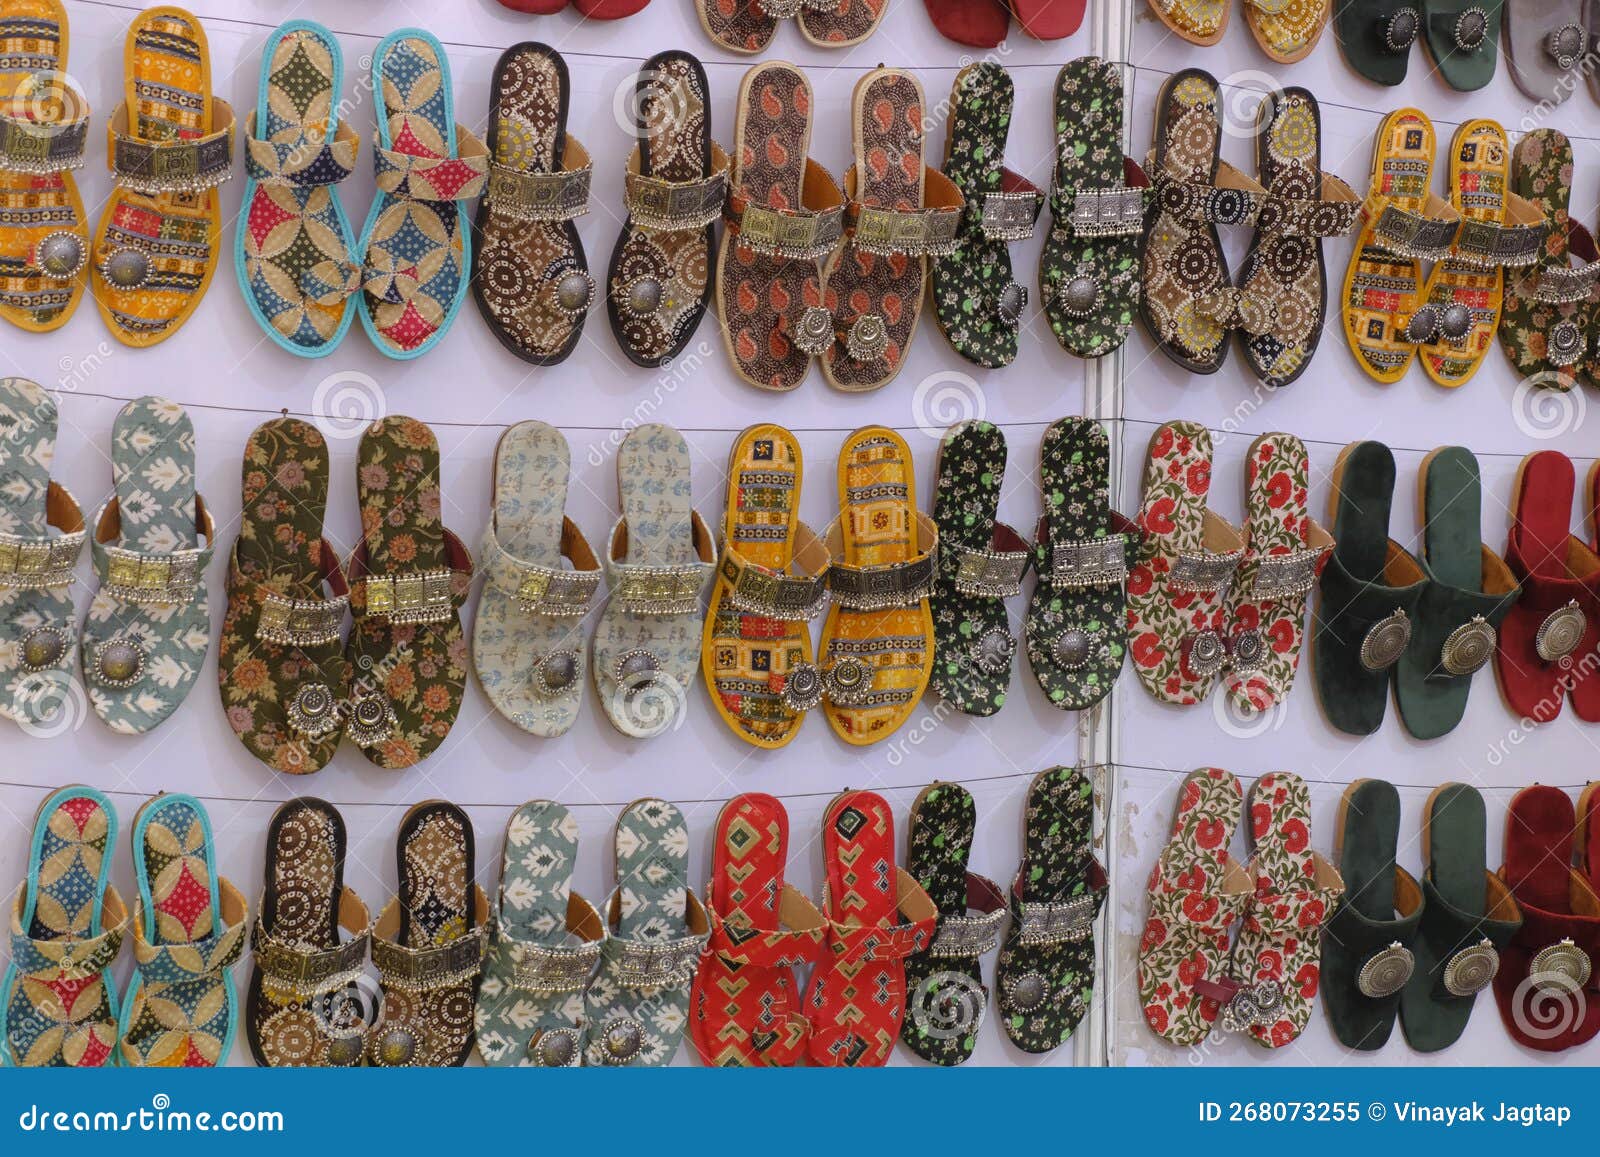 colorful handmade chappals (sandals) being sold in an indian market, handmade leather slippers, traditional footwear